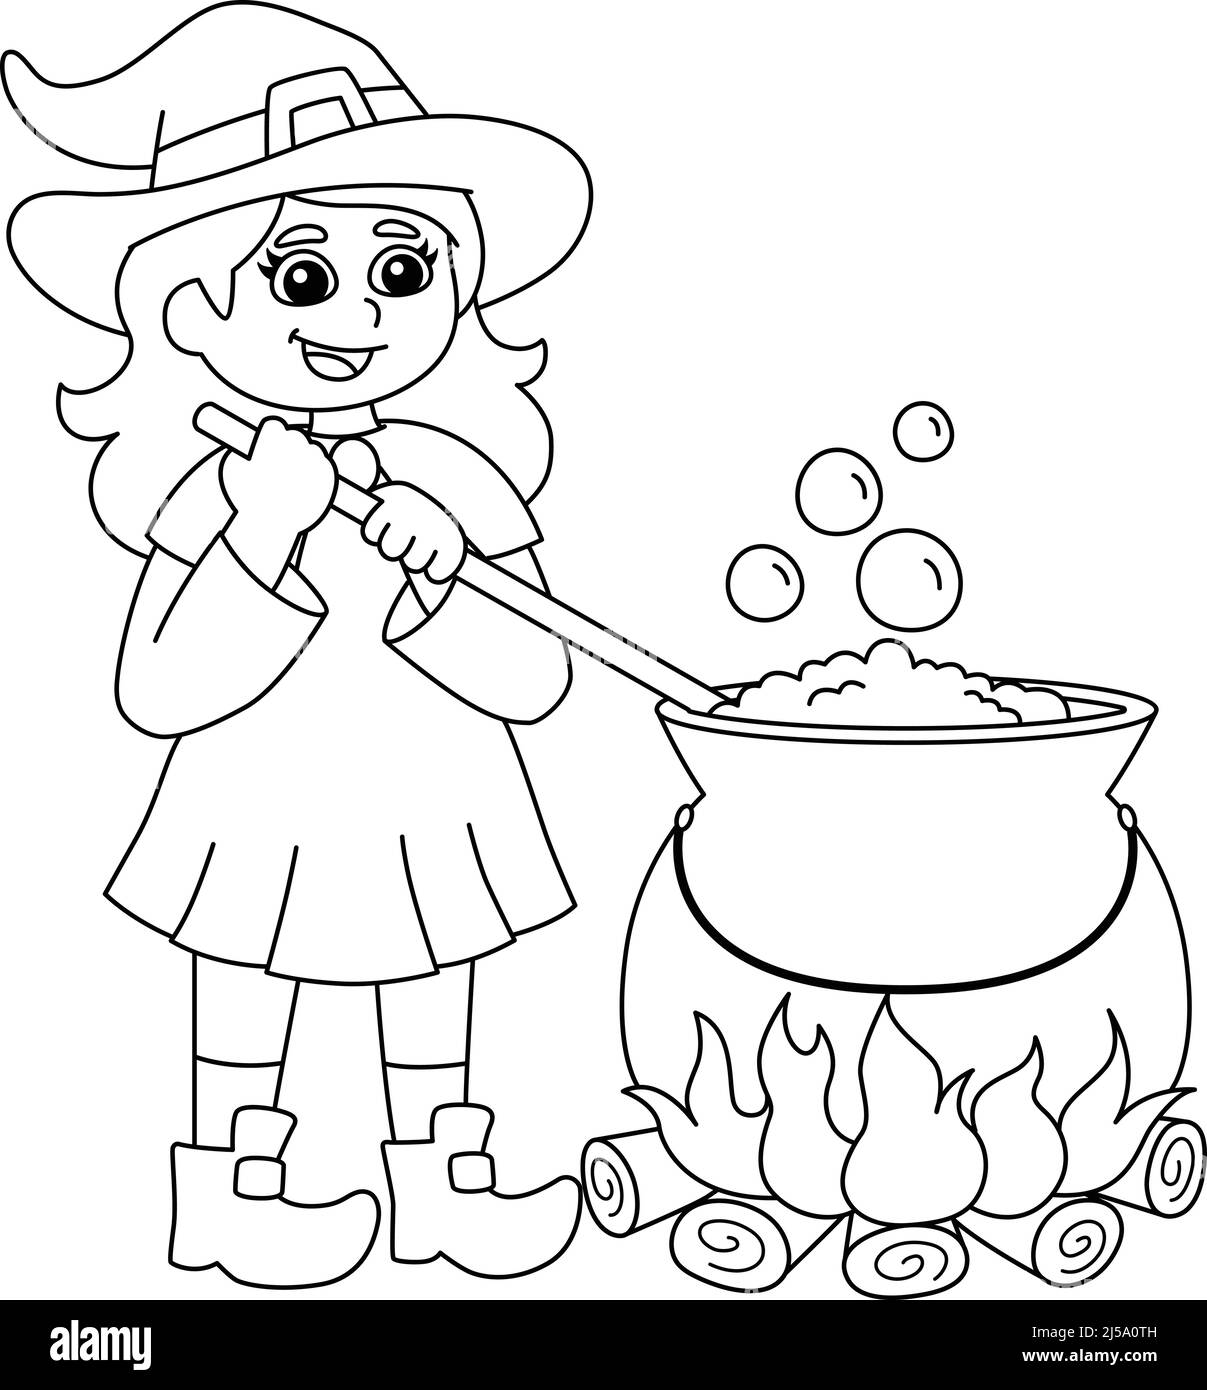 https://c8.alamy.com/comp/2J5A0TH/witch-potion-pot-halloween-coloring-page-isolated-2J5A0TH.jpg